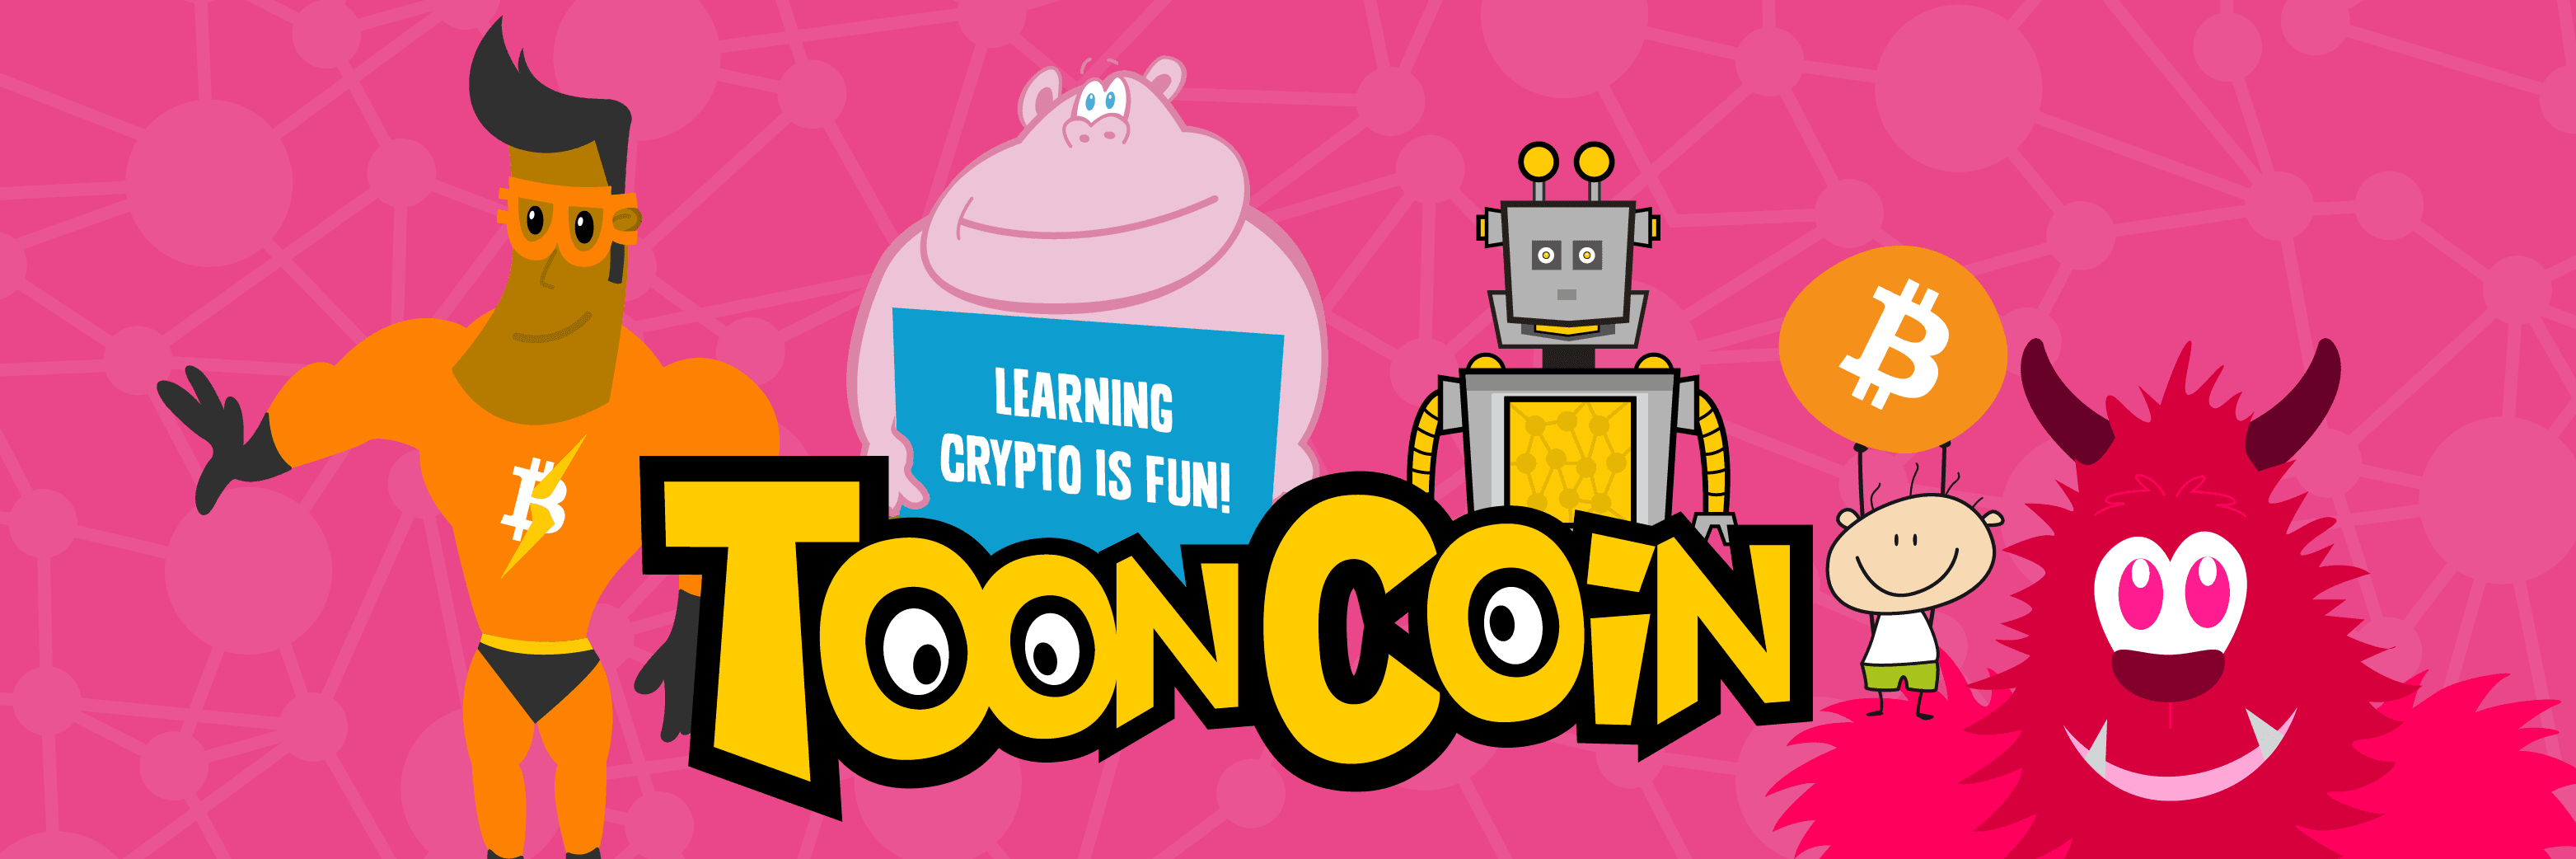 ToonCoin banner